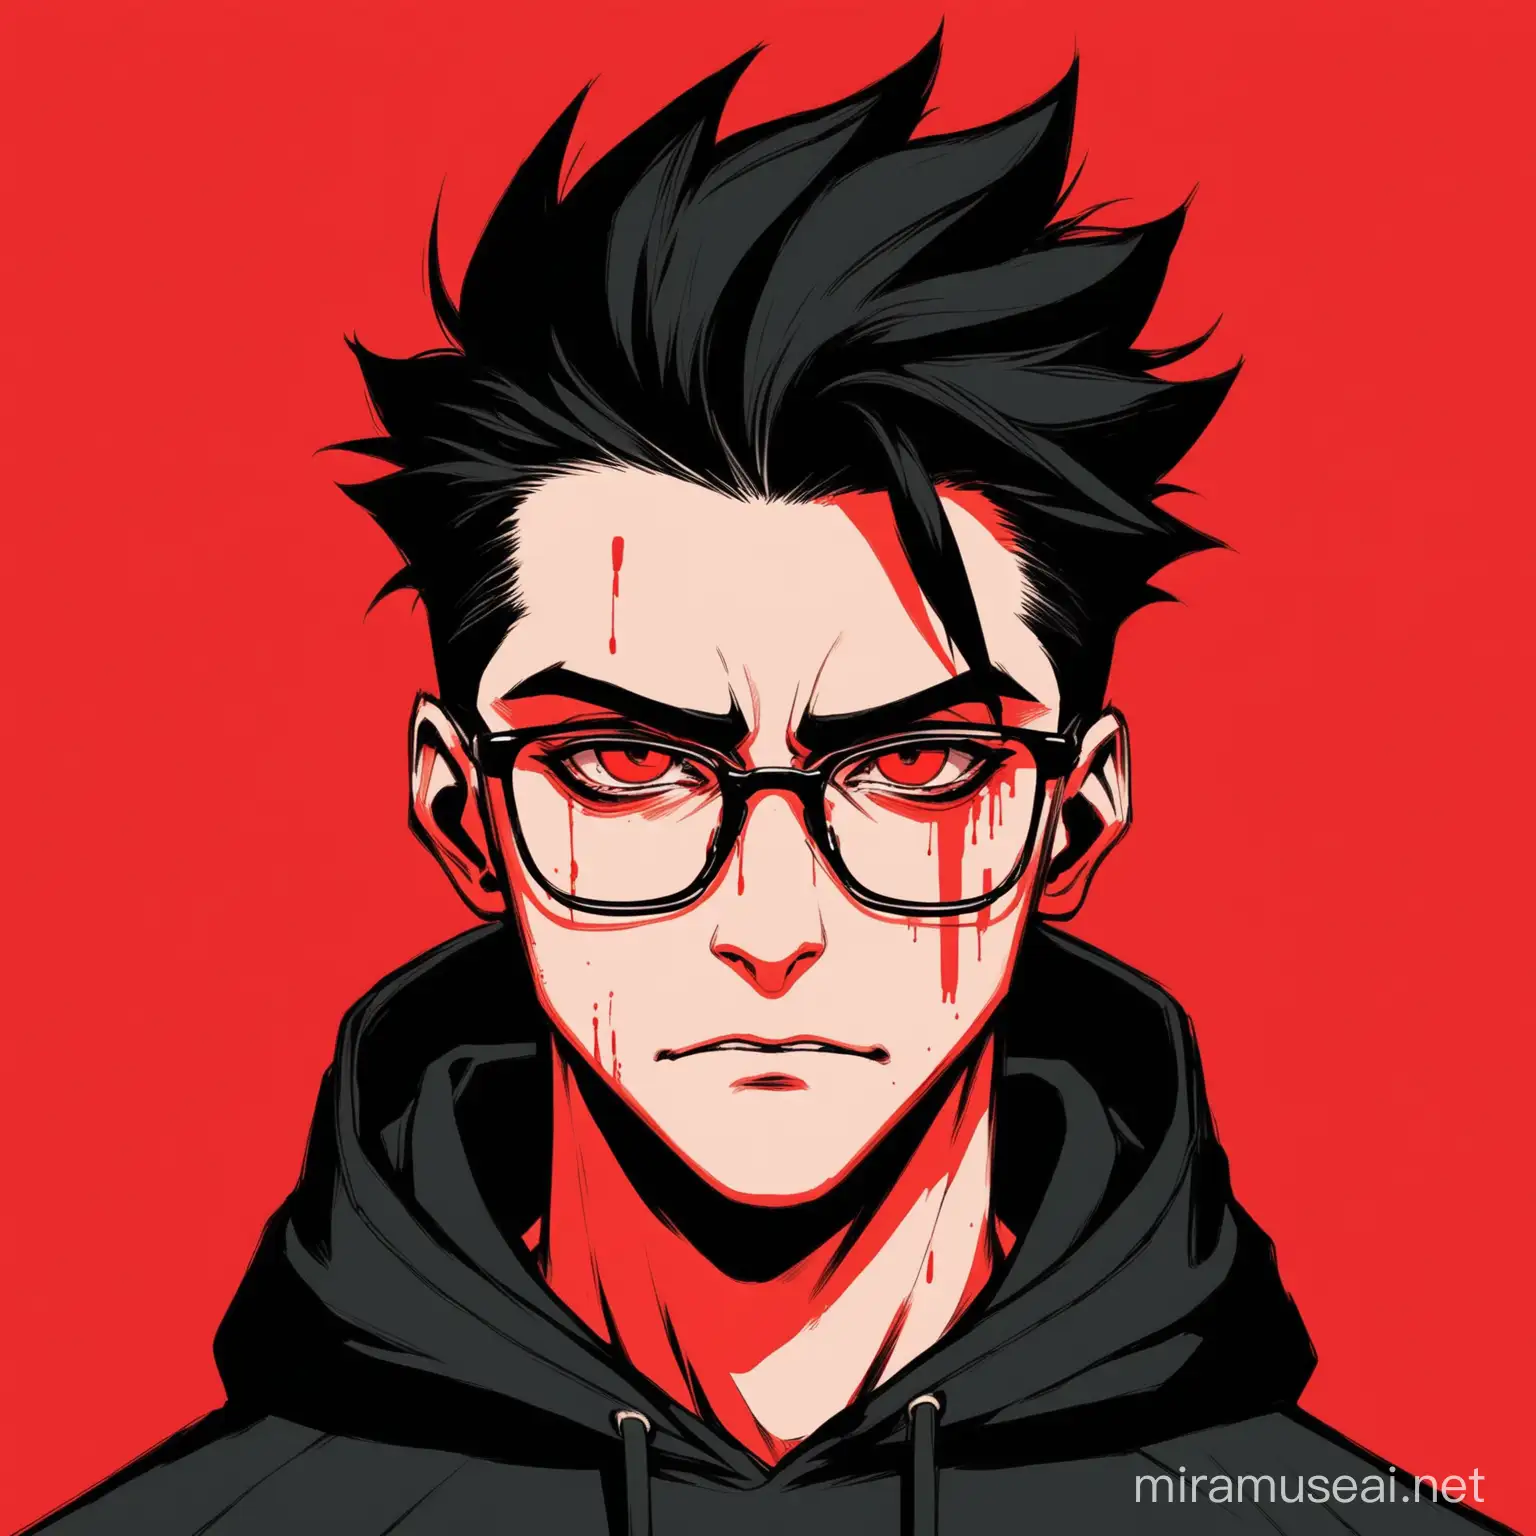 Stylish Hacker with Quiff Hair in Black Hoodie on Red Background